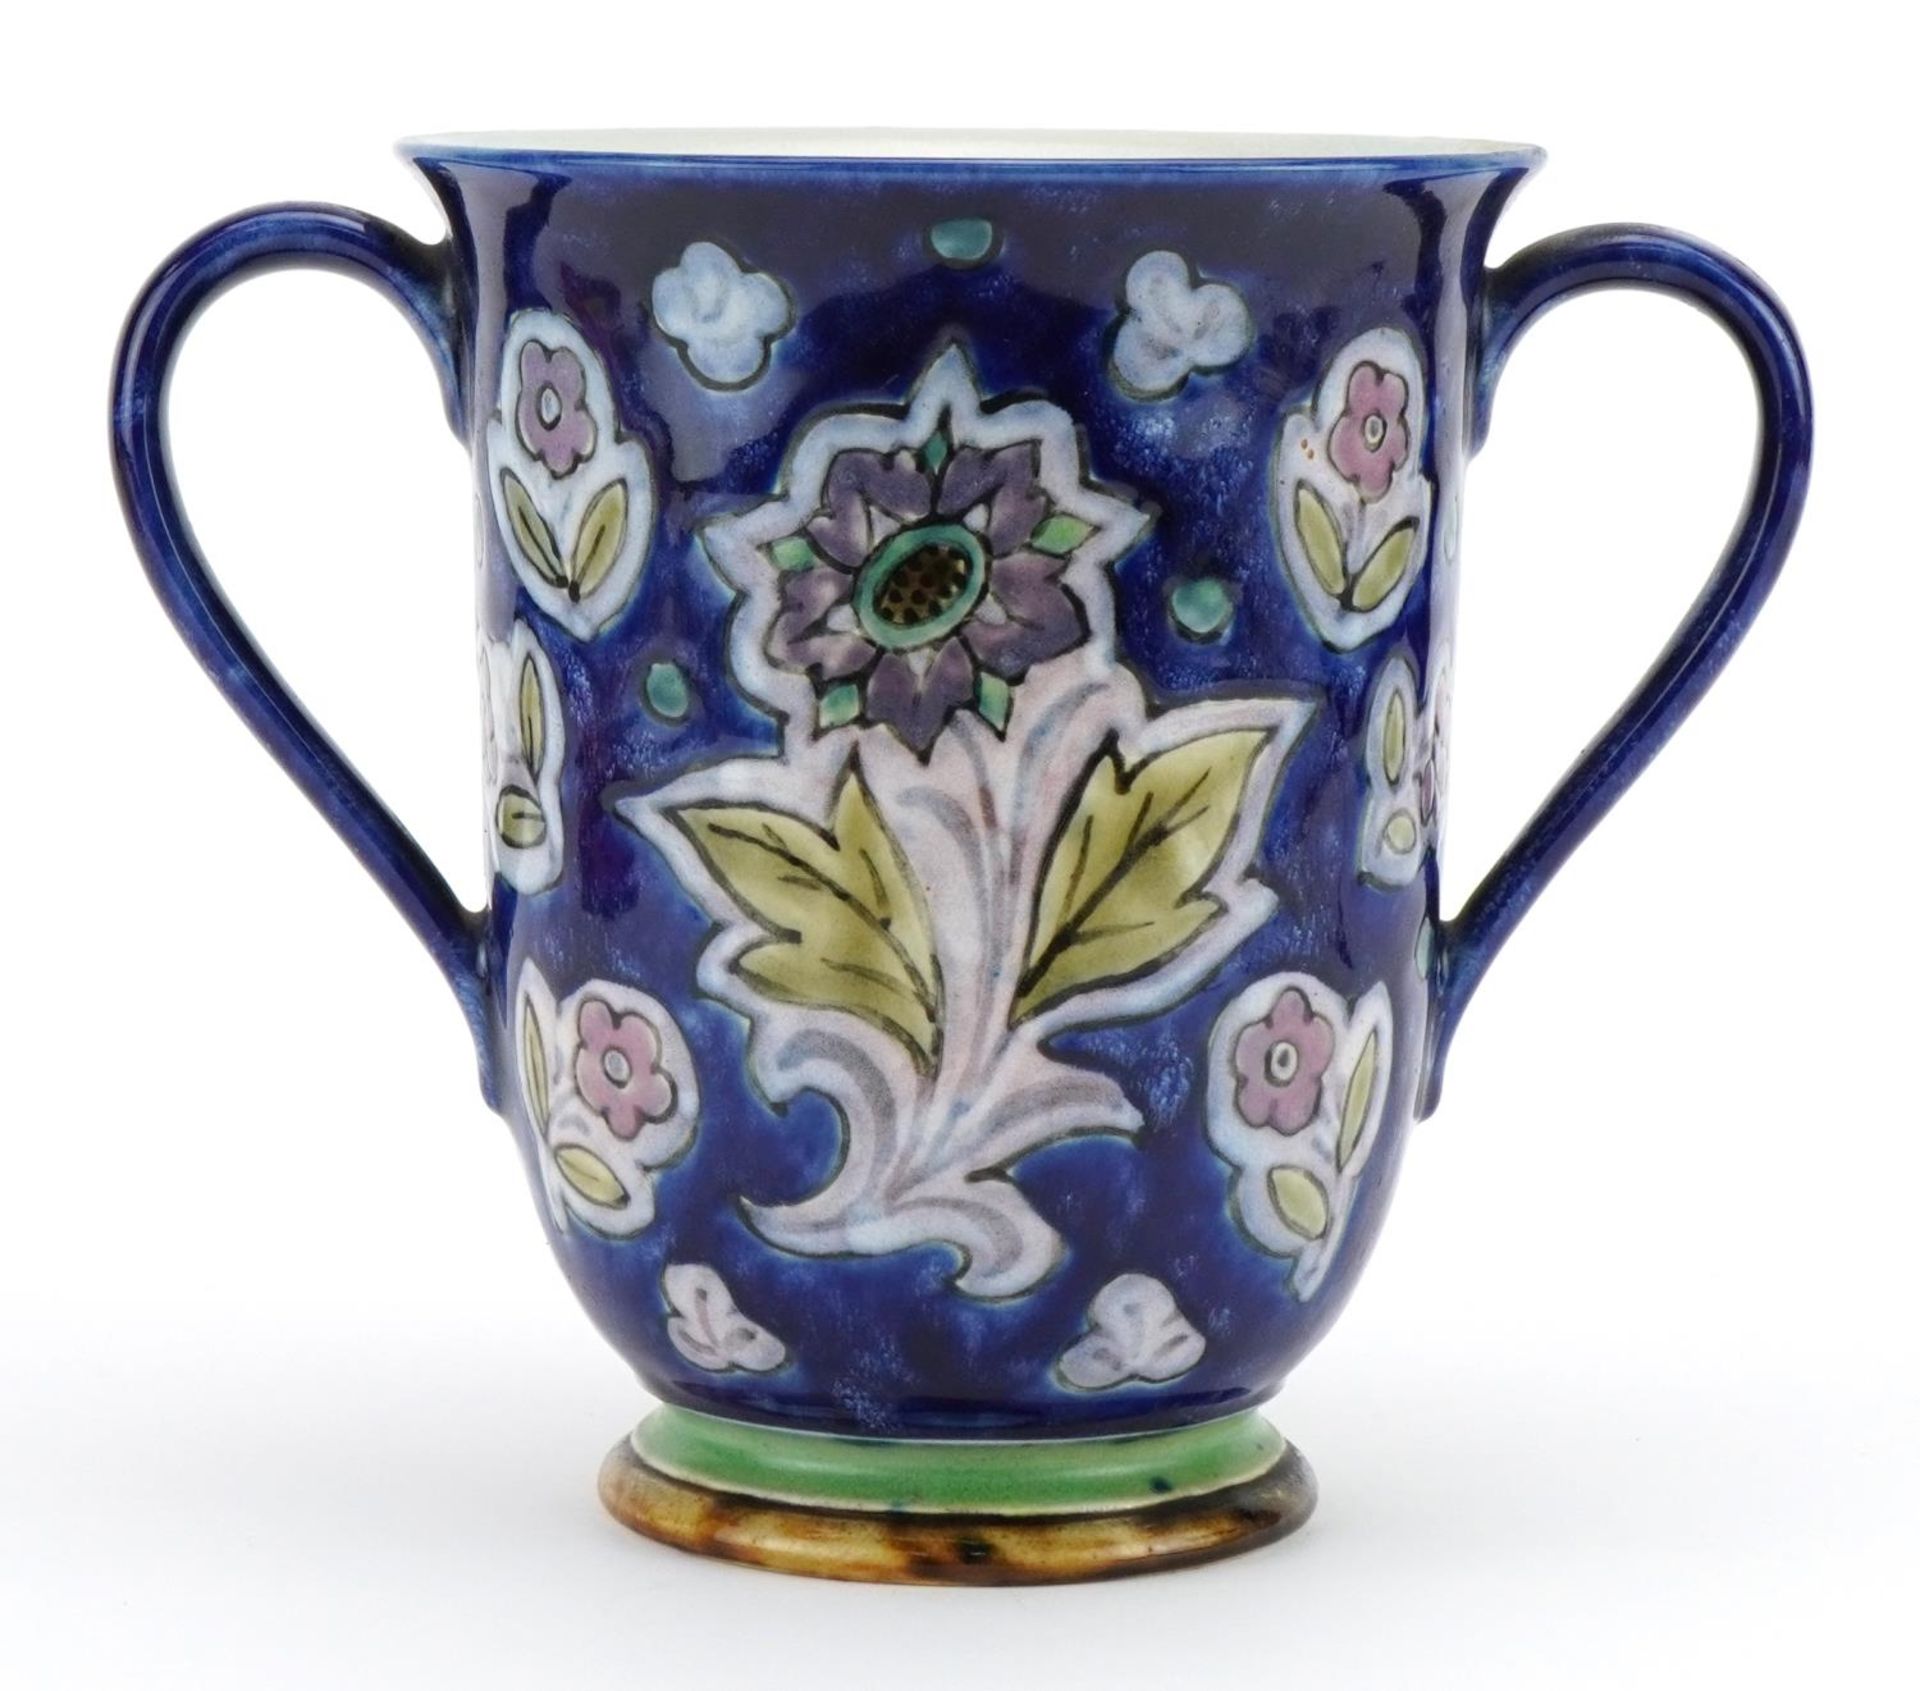 Doulton stoneware loving cup with twin handles hand painted with stylised flowers, 18.5cm high - Image 2 of 4